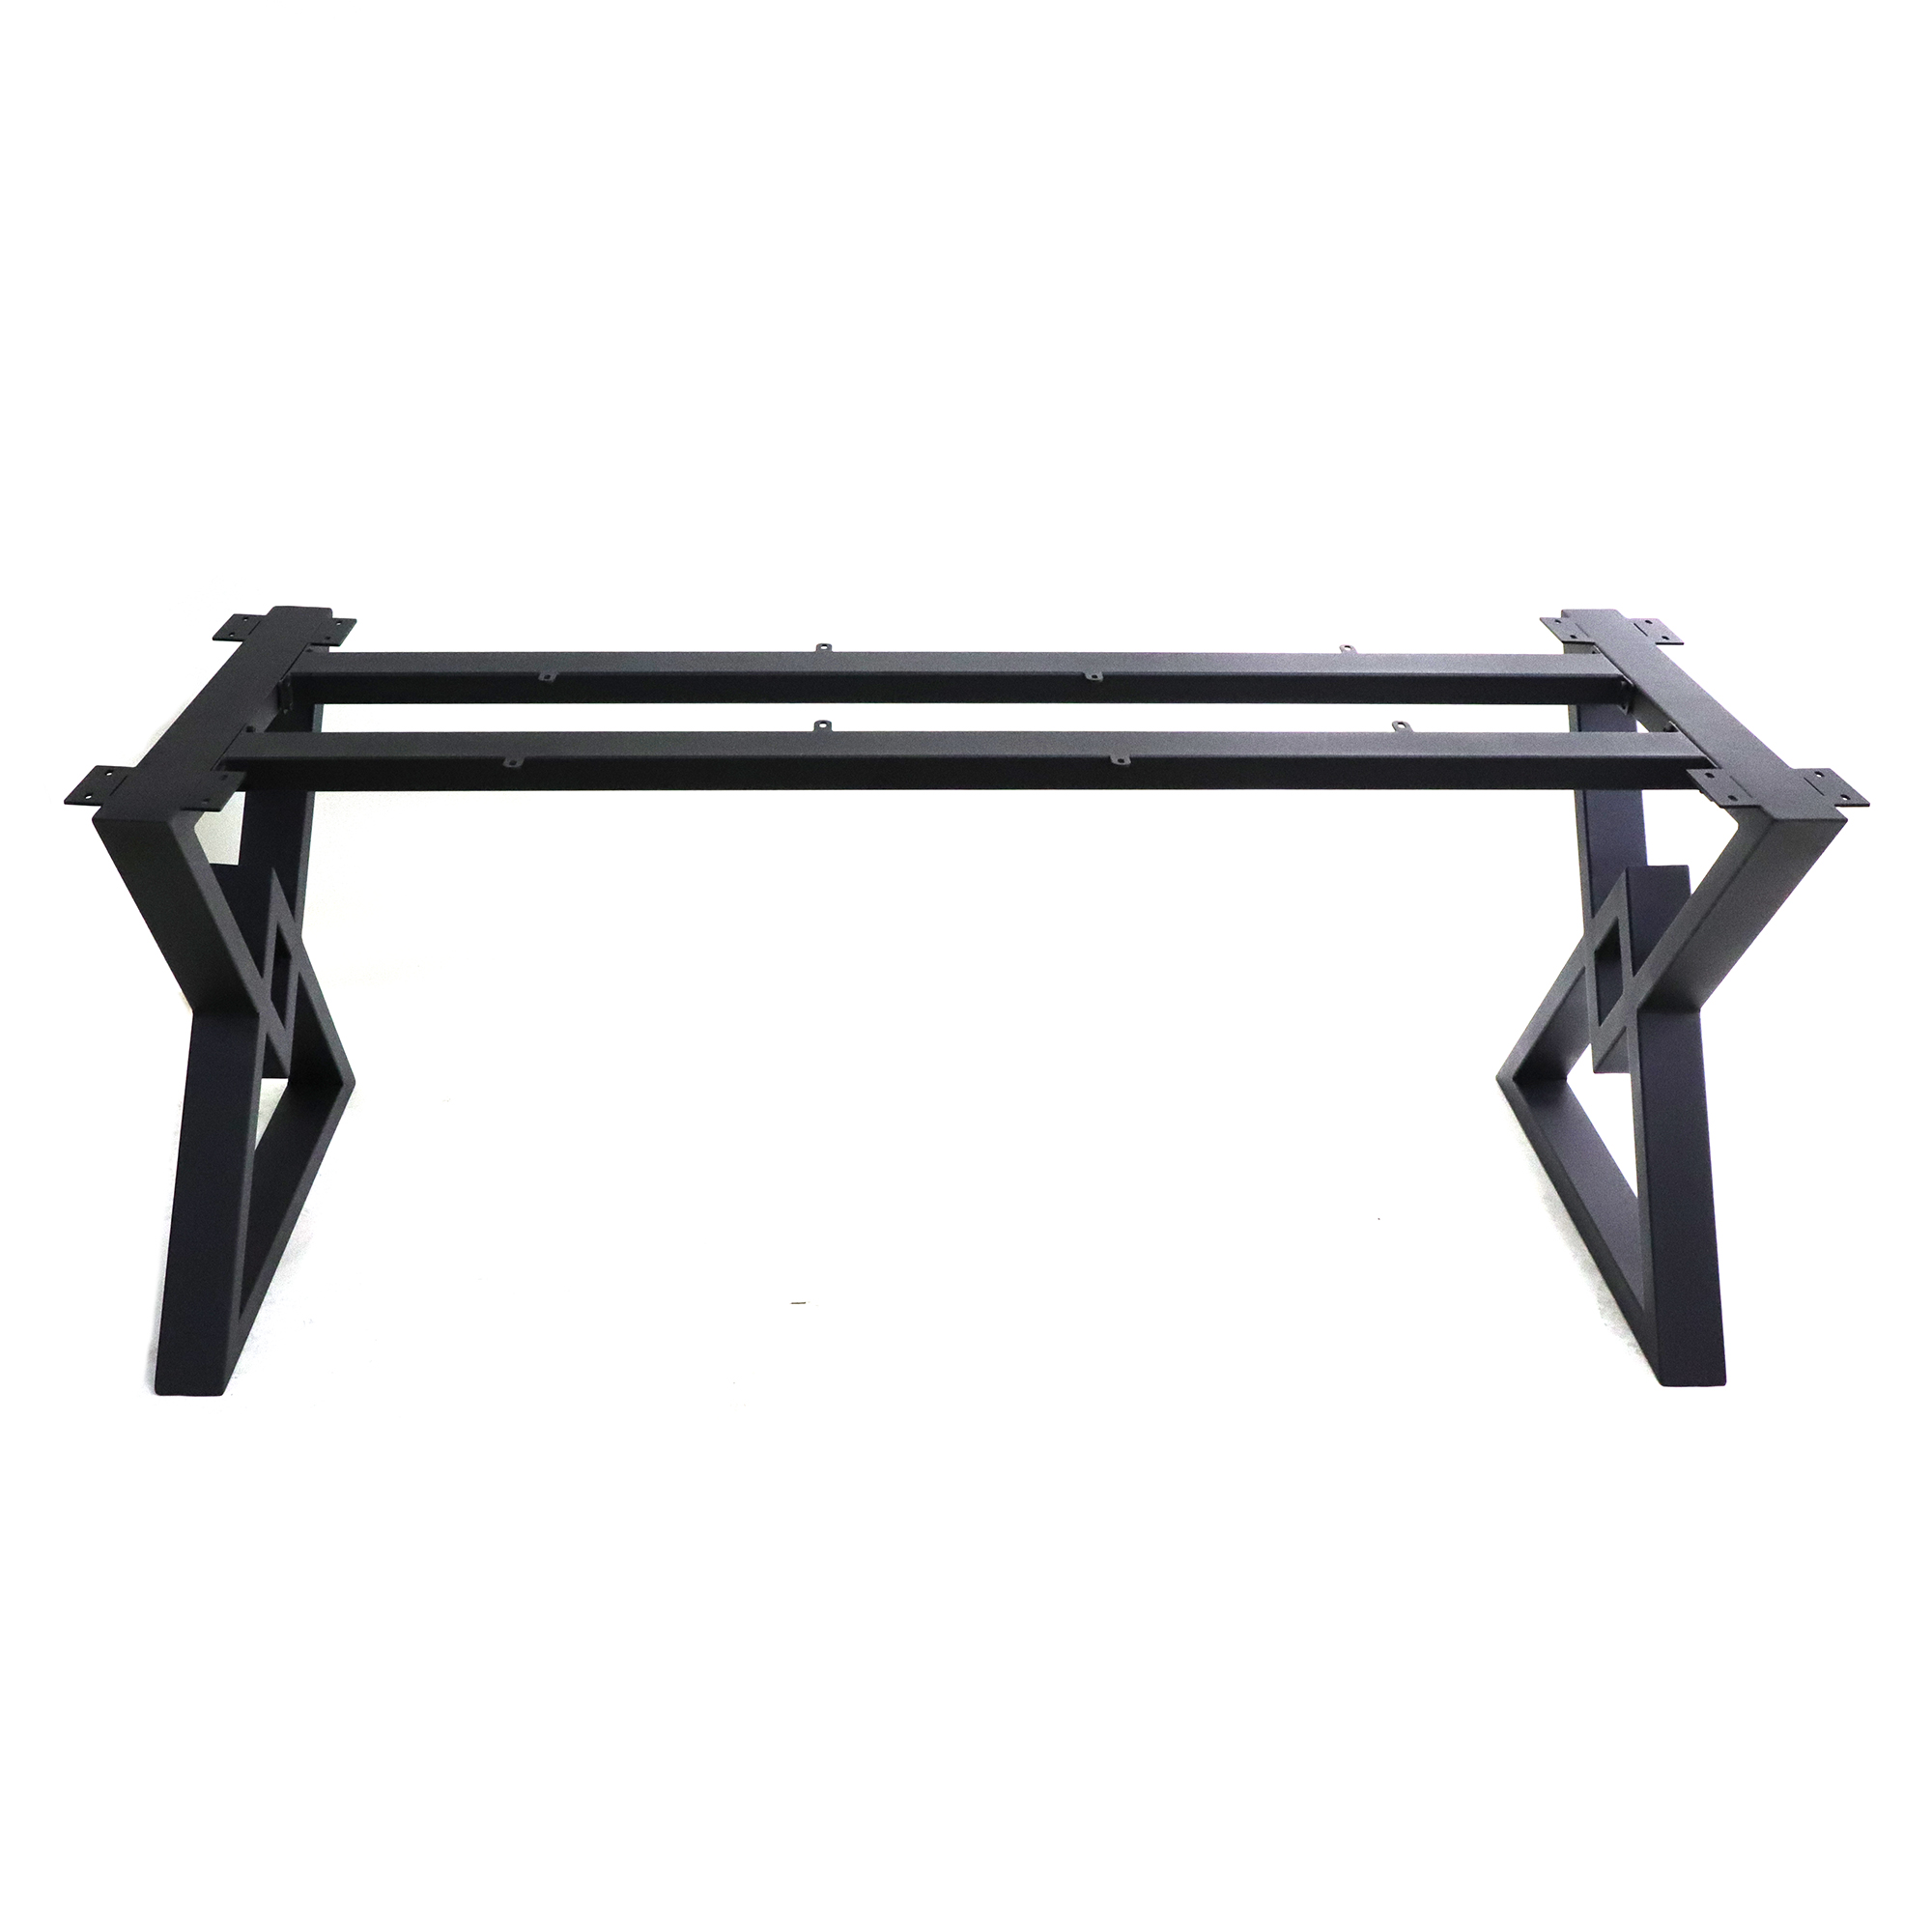 Table Frames Industrial Restaurant Desk Office Cast Iron Steel Bench Dinning Coffee Furniture Legs Metal Dining Table Base For Table